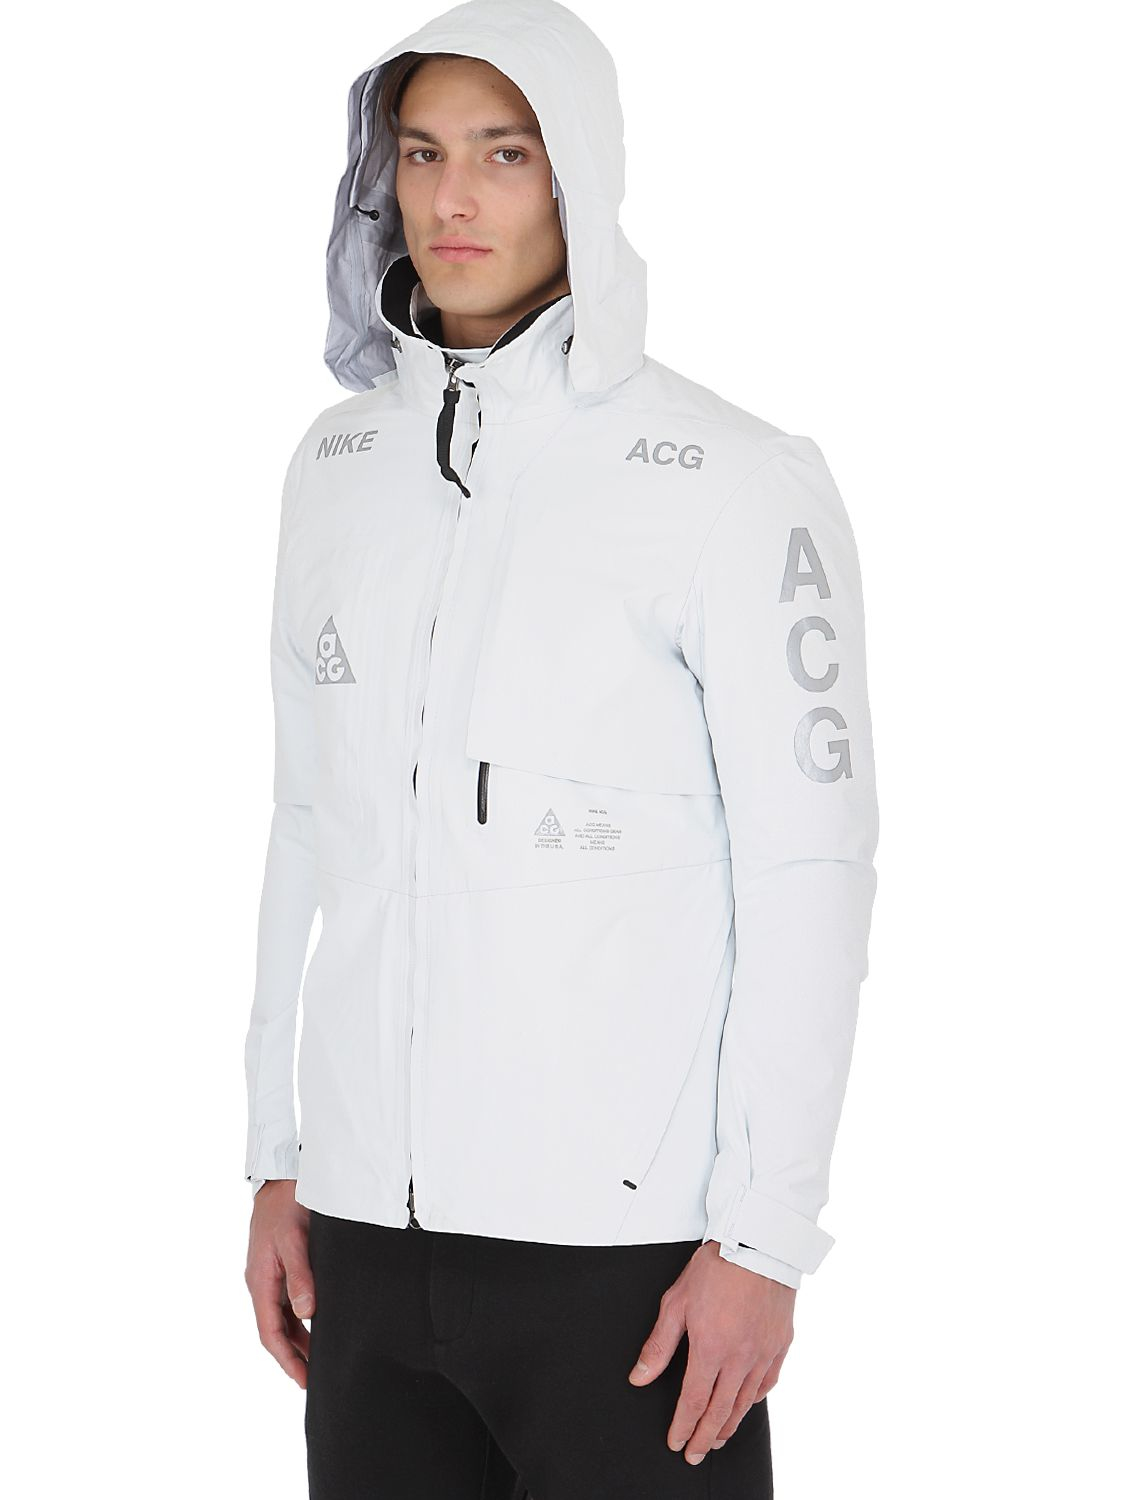 Nike Acg Gore-tex 2 In 1 System Shell Jacket in White for Men - Lyst